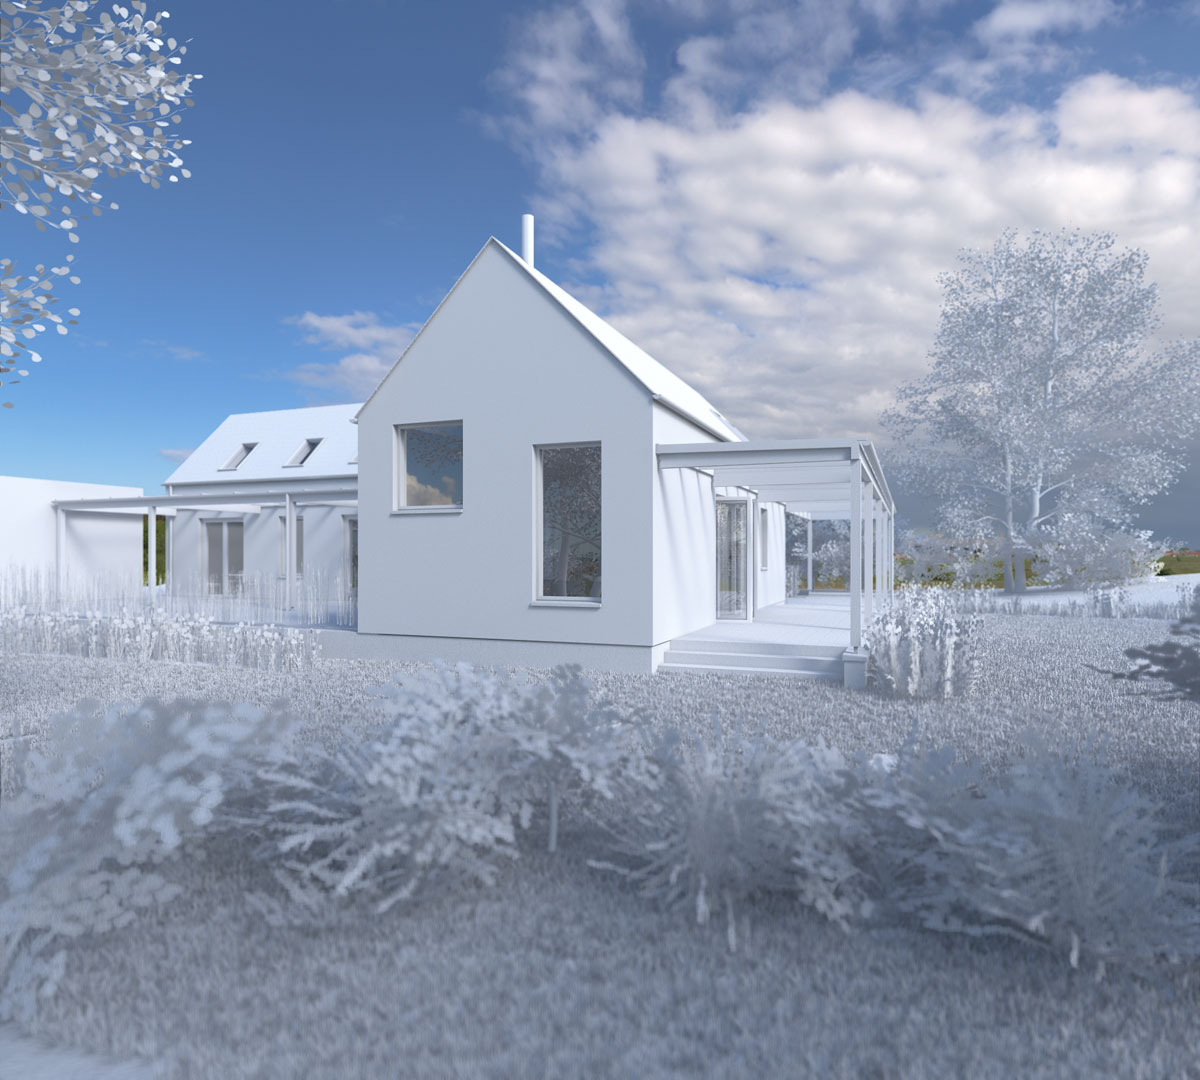 This new home is located at a sea-side location in Co. Wexford.